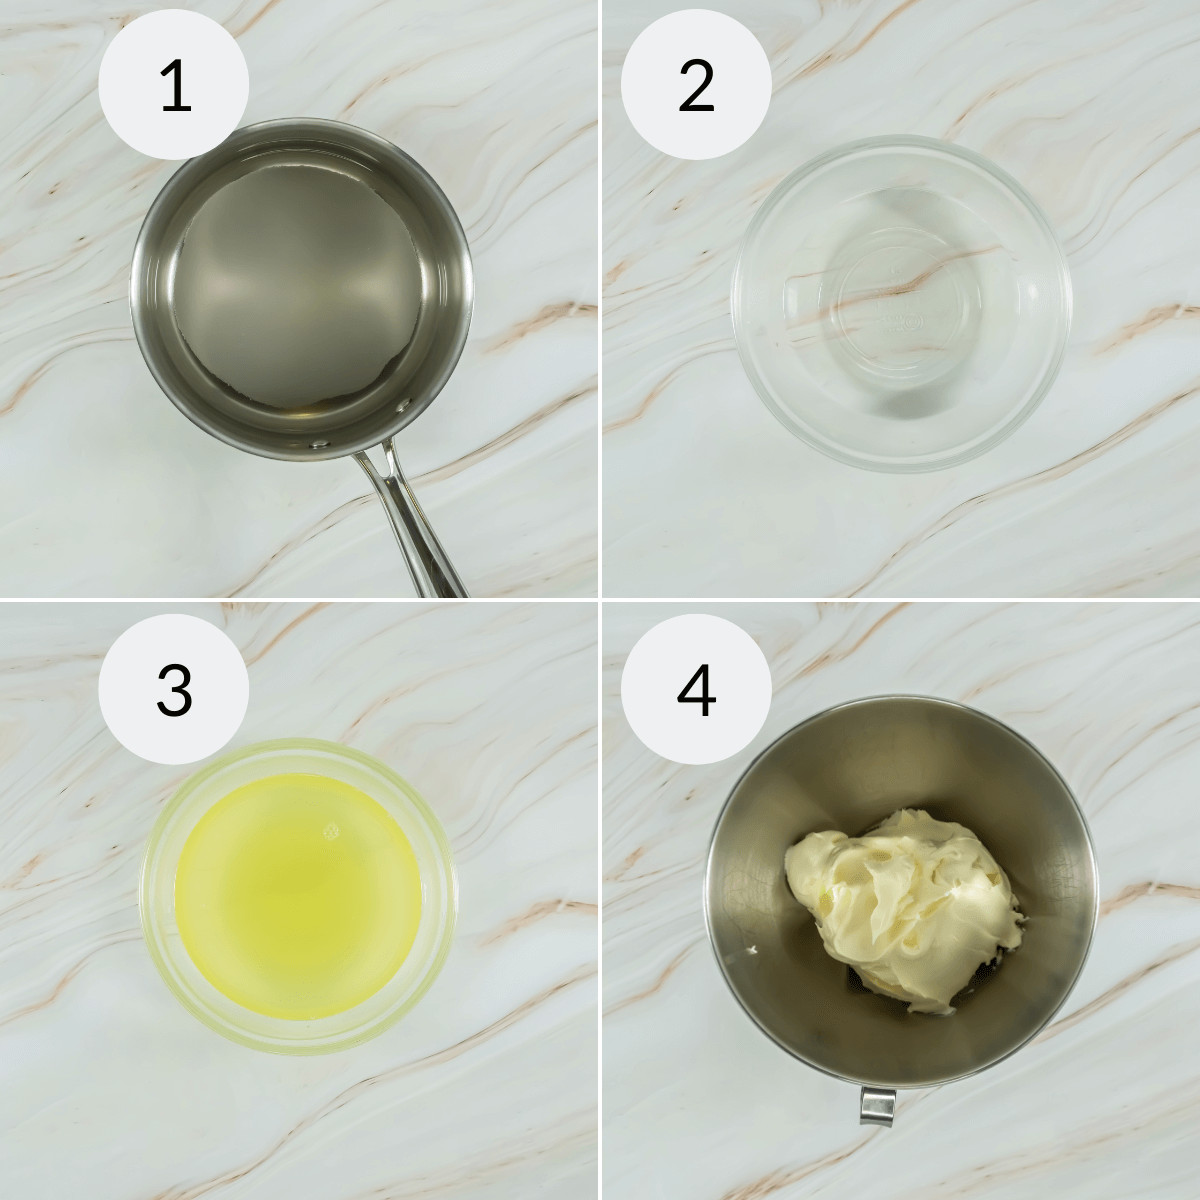 Four-step sequence showing the preparation of ingredients in cookware for Limoncello Tiramisu: 1) an empty saucepan, 2) a glass bowl with a clear liquid